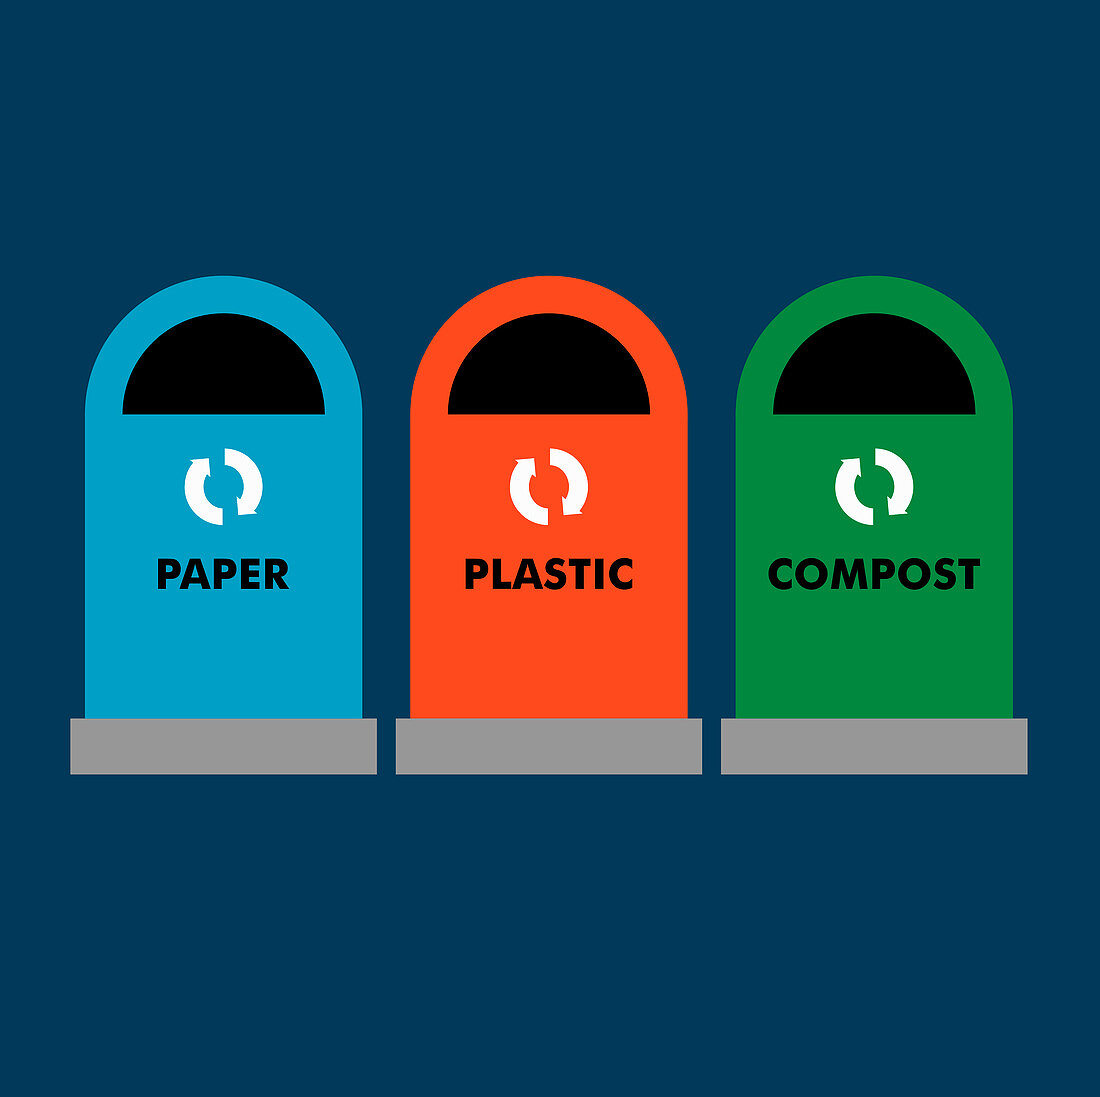 Paper, plastic and compost recycling bins, illustration